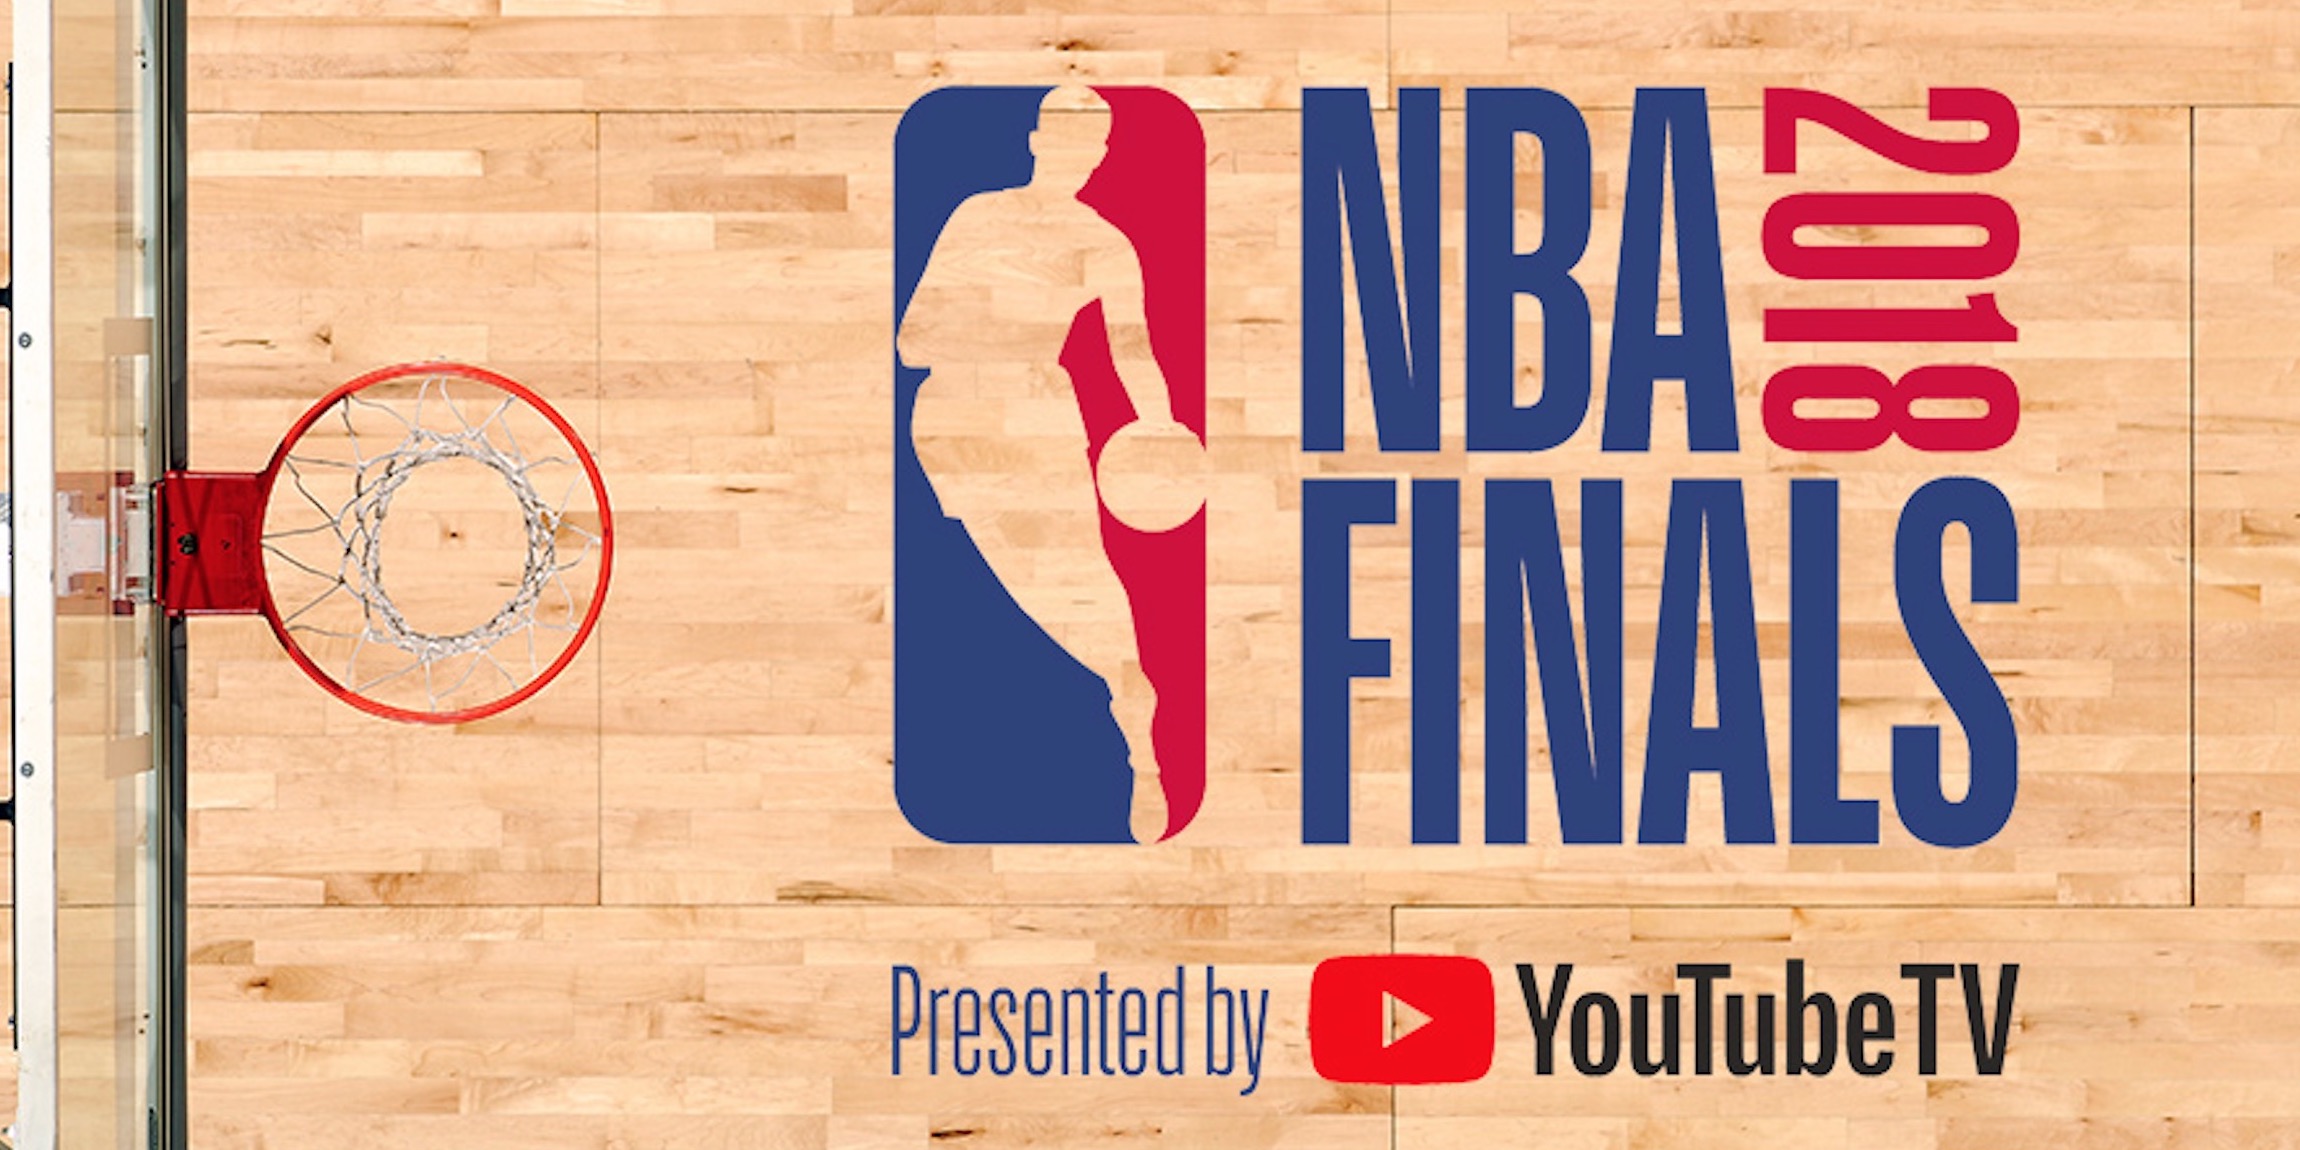 How to stream the 2018 NBA Finals live on Chromecast, Android, Chrome OS, and Android TV